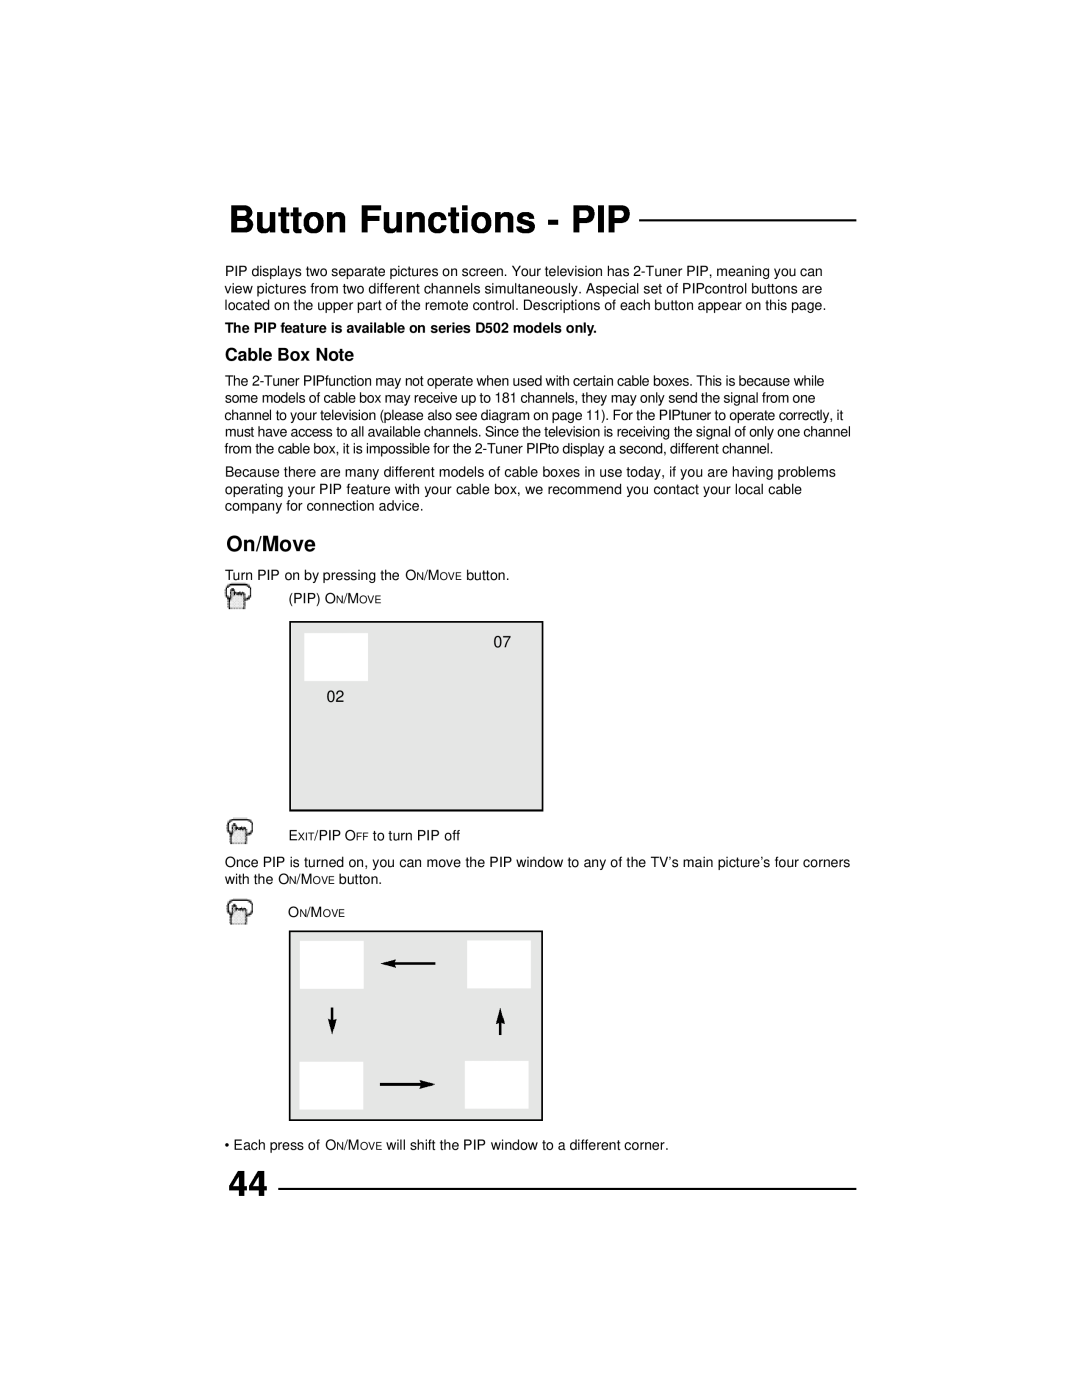 JVC AV 36D302 Button Functions - PIP, On/Move, Cable Box Note, The PIP feature is available on series D502 models only 